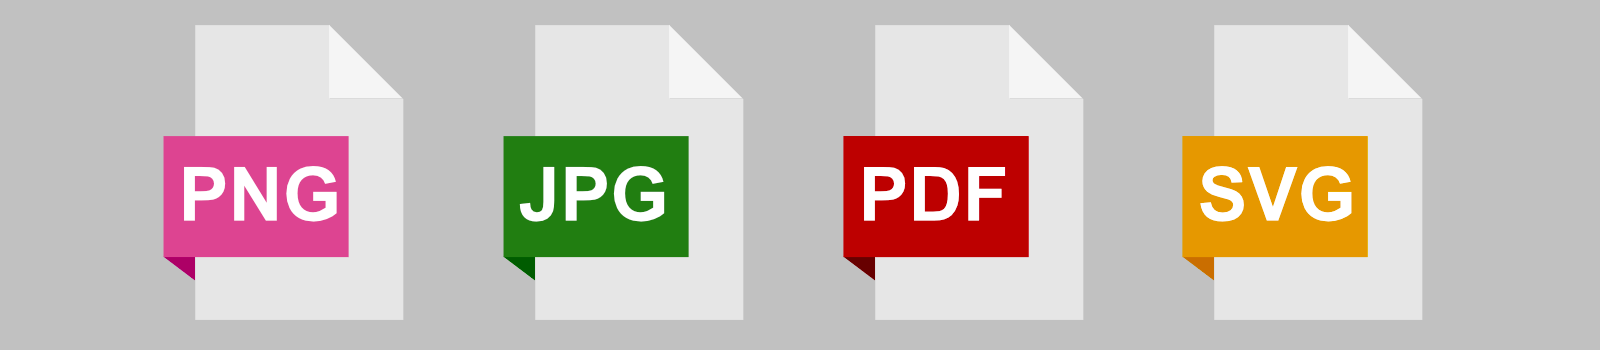 Illustration: web output file formats used to sell graphics and digital art